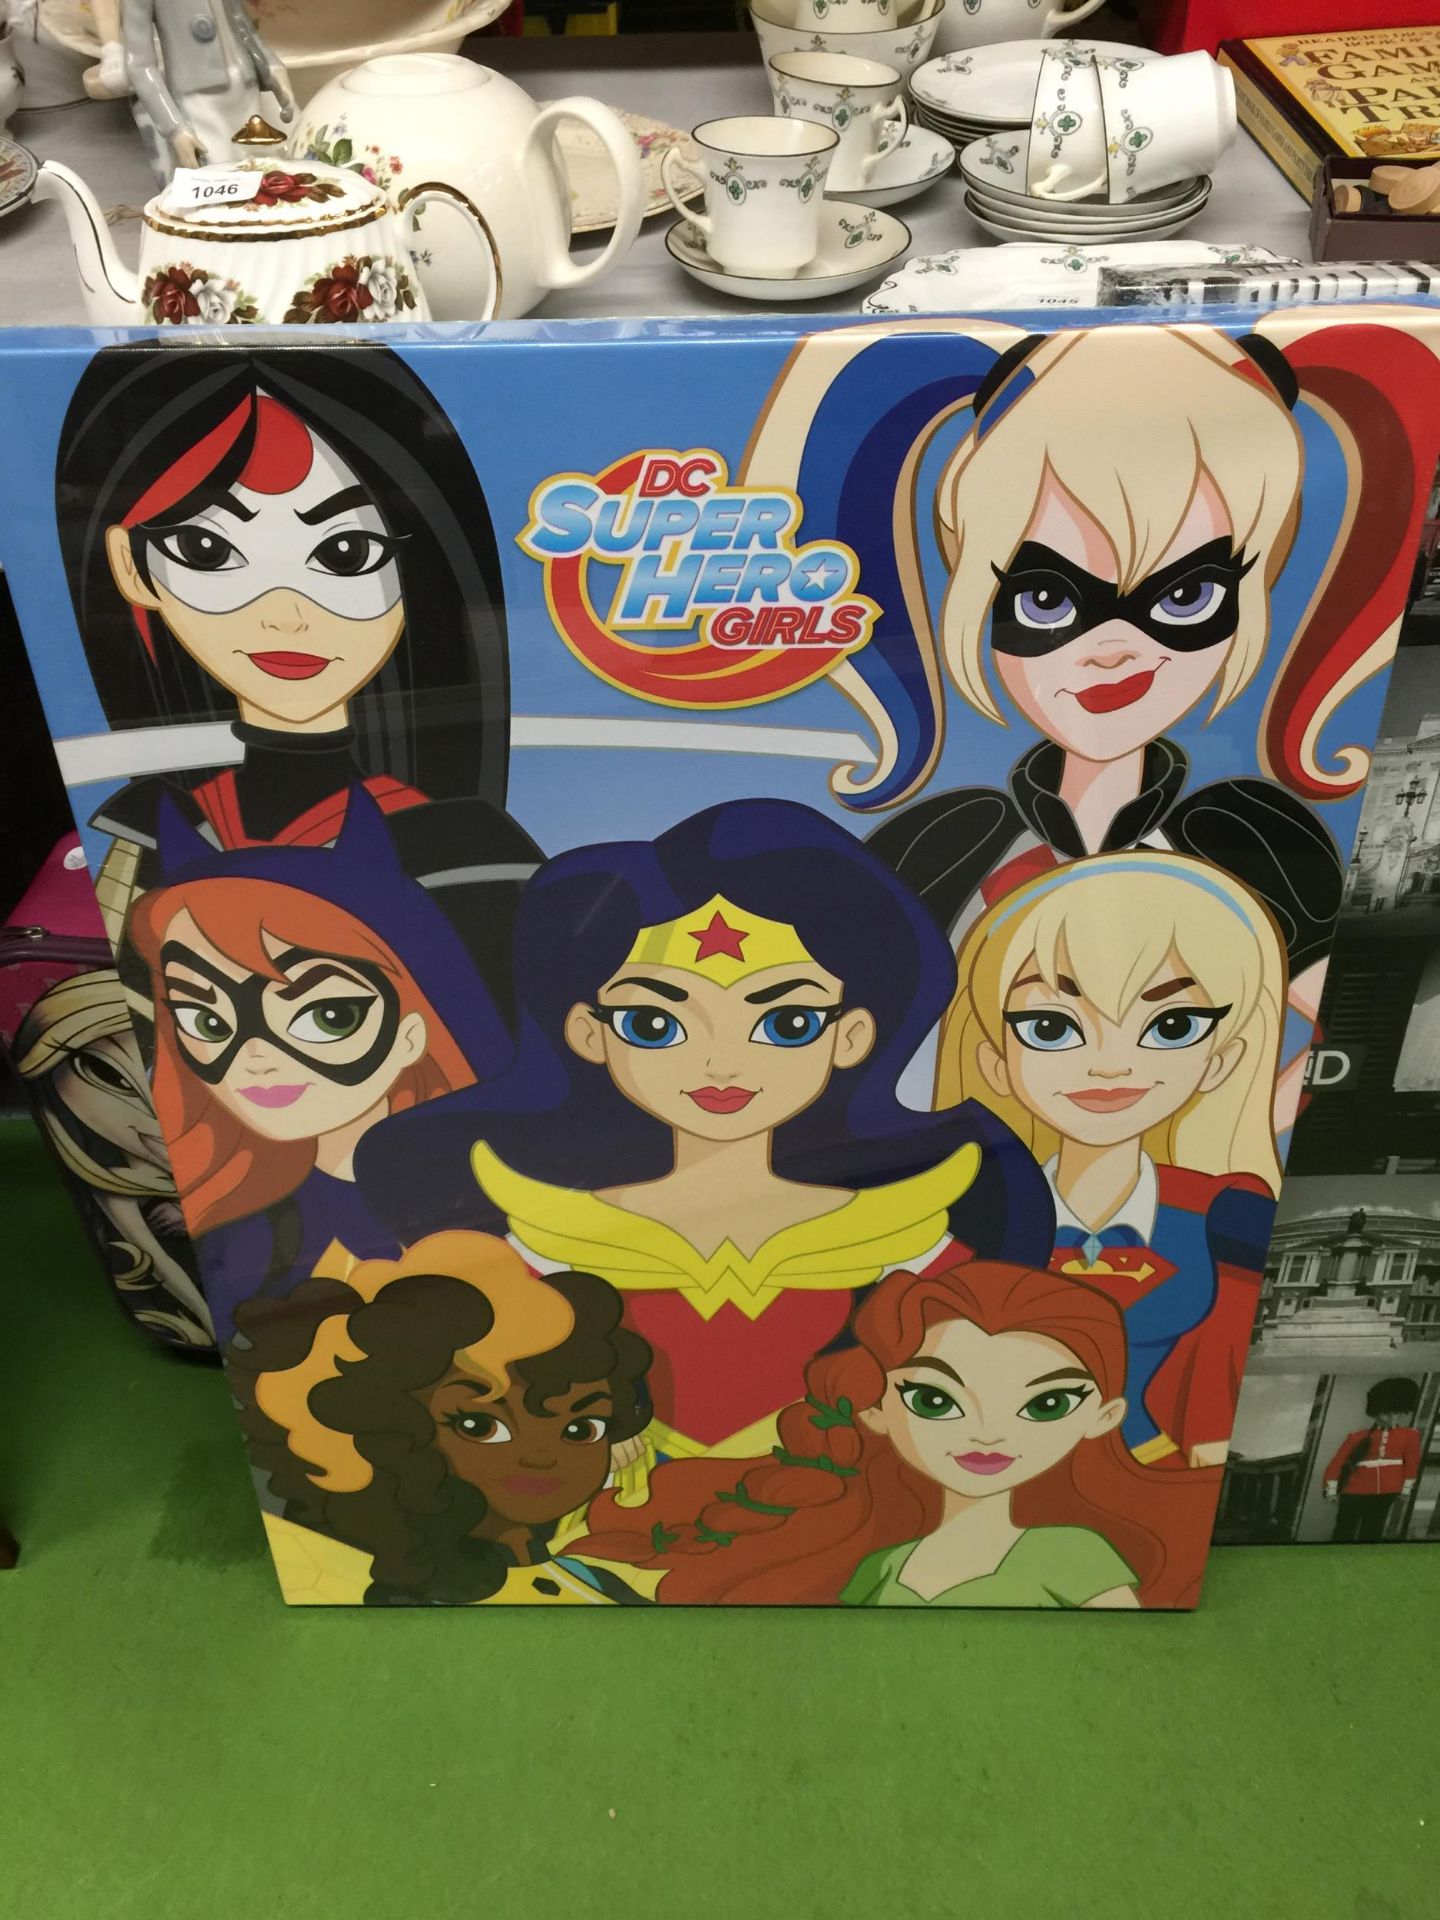 THREE LARGE CANVAS PRINTS - DC SUPER HERO GIRLS, LONDON LANDMARKS AND 'THE BEST THINGS IN LIFE ARE - Image 3 of 4